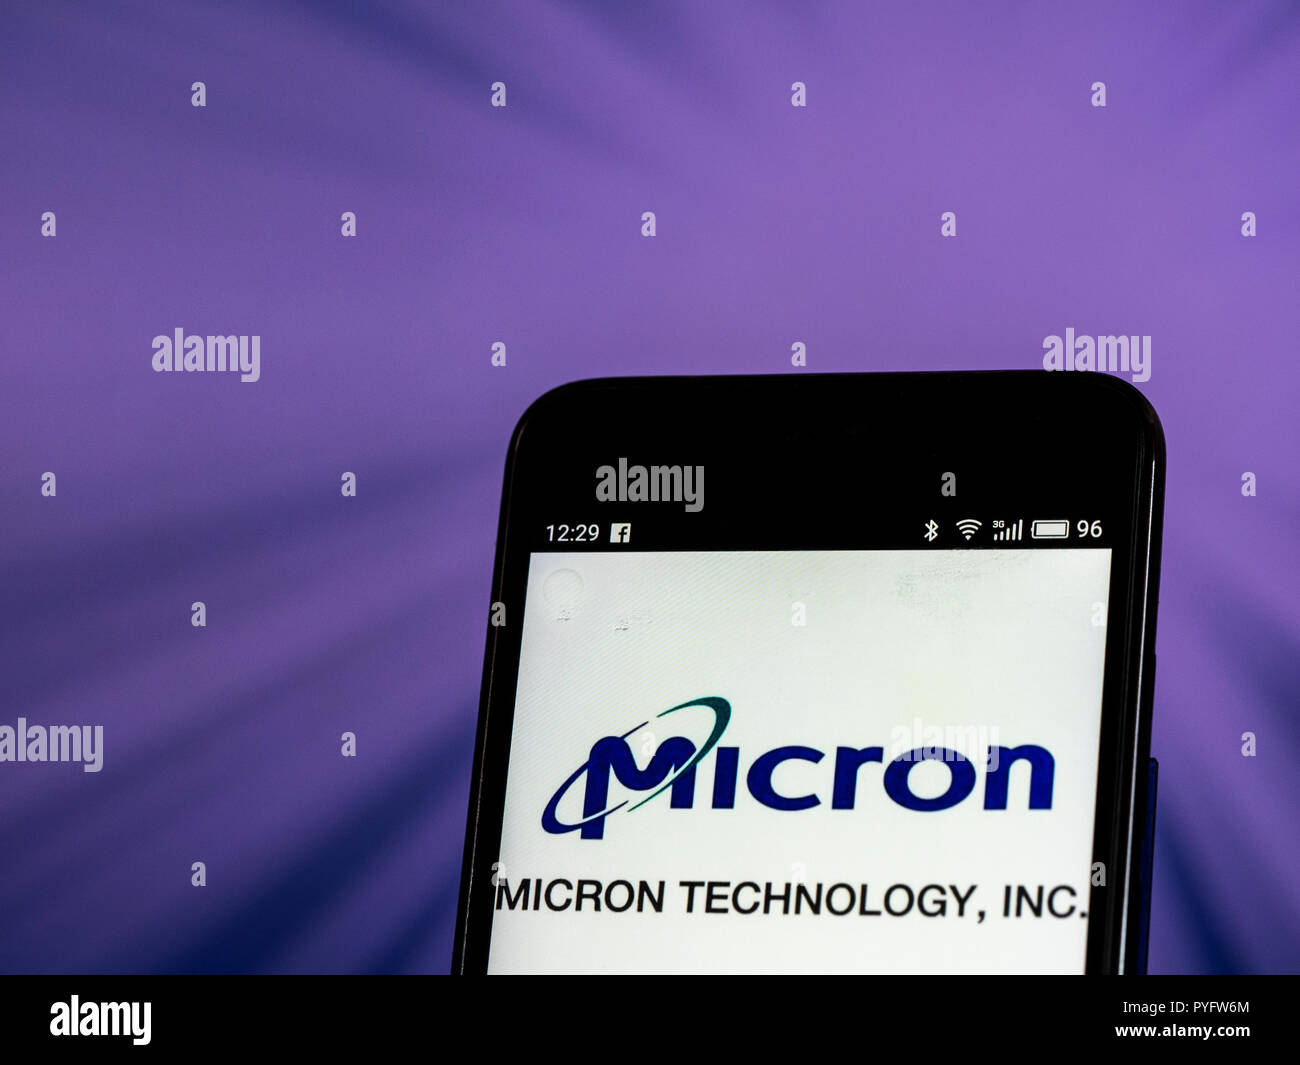 Micron Technology Corporation  logo seen displayed on smart phone. Micron Technology, Inc. is an American global corporation. The company produces many forms of semiconductor devices, including dynamic random-access memory, flash memory, and solid-state drives. Its consumer products are marketed under the brands Crucial and Ballistix. Stock Photo